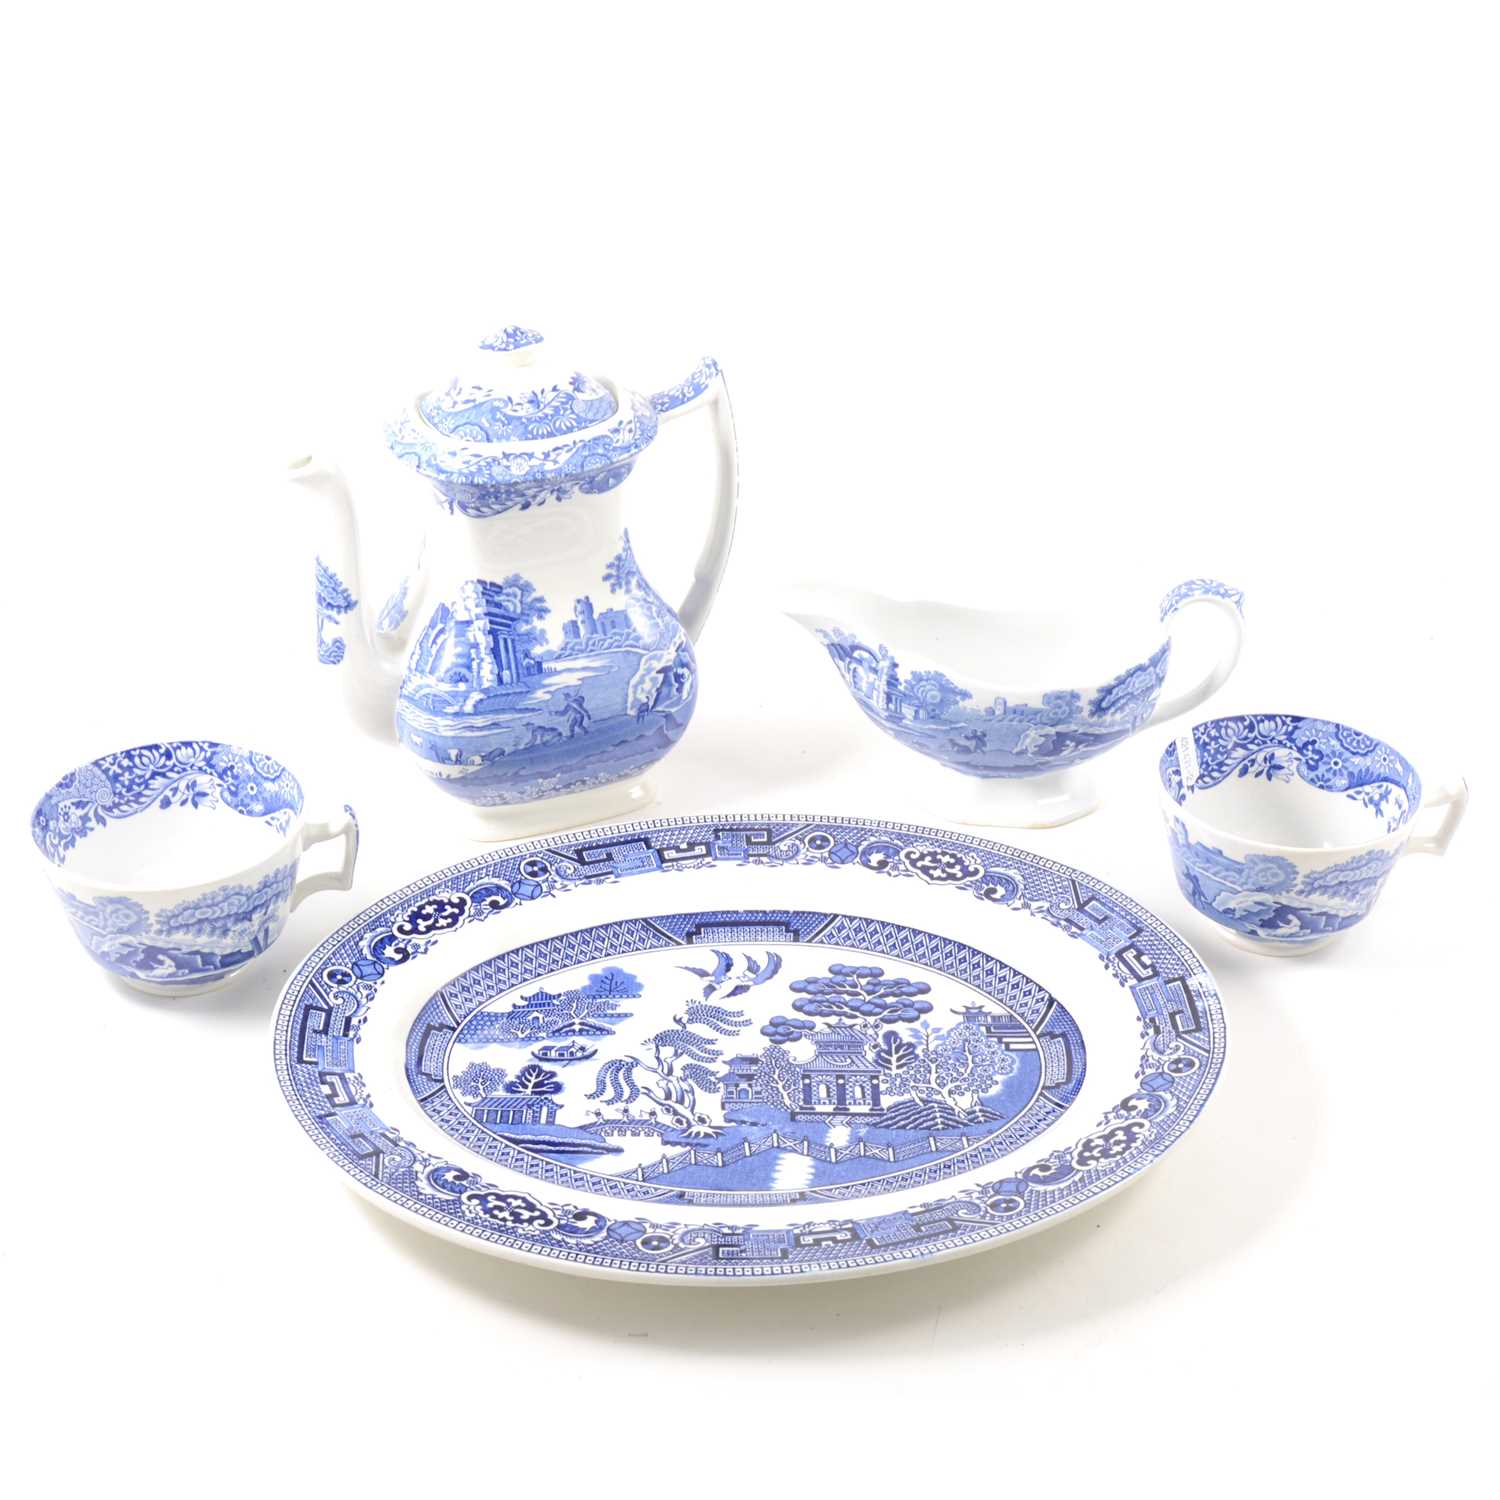 Lot 51 - A quantity of blue and white tableware, mostly Copeland Spode's Italian